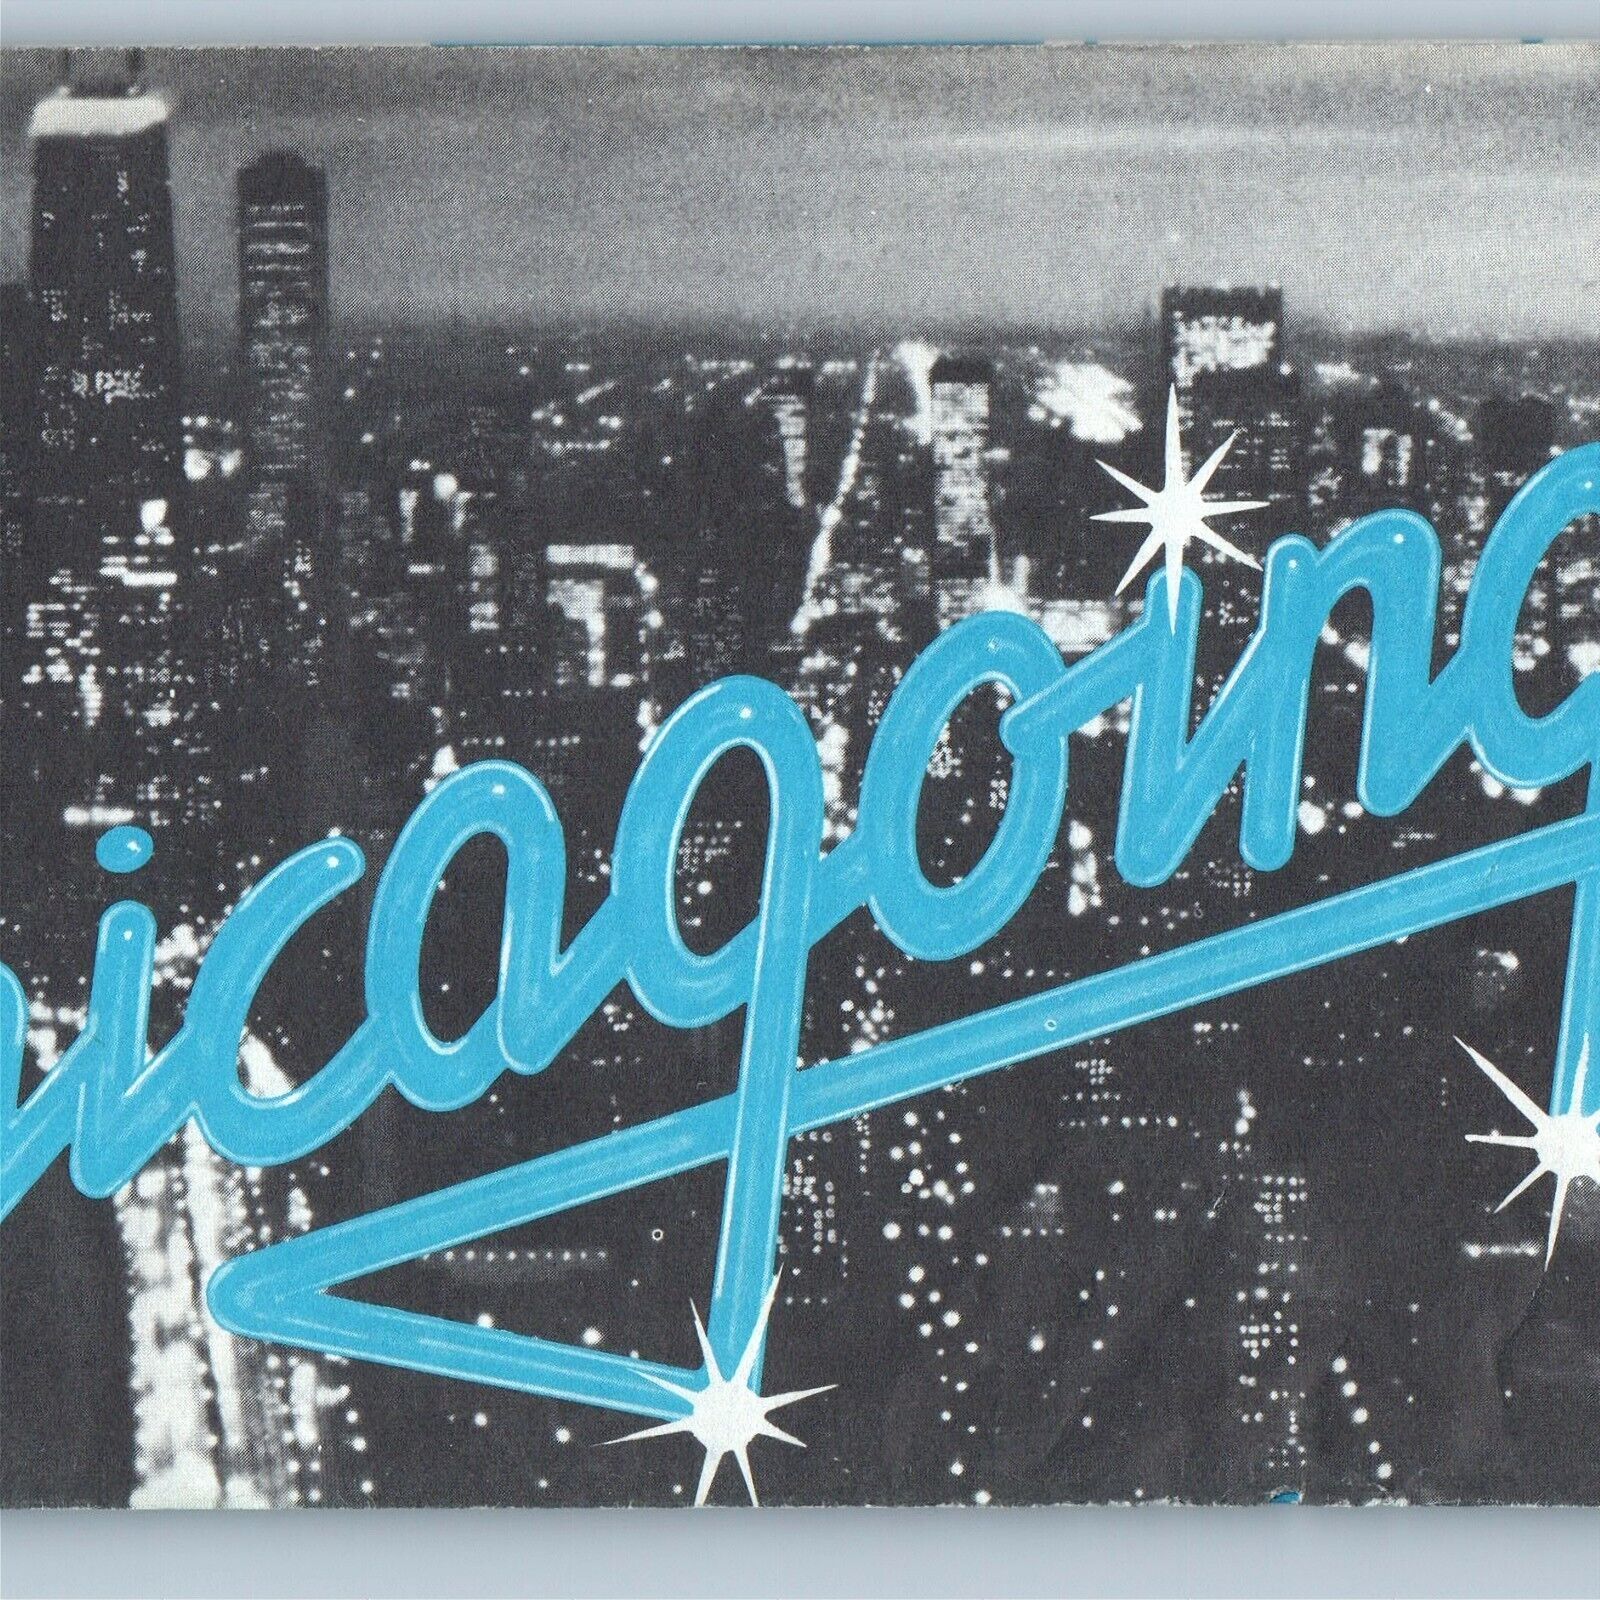 1979 Chicago Go Chicagoing Visitors Guide & Downtown Map Road Official Retro 8C